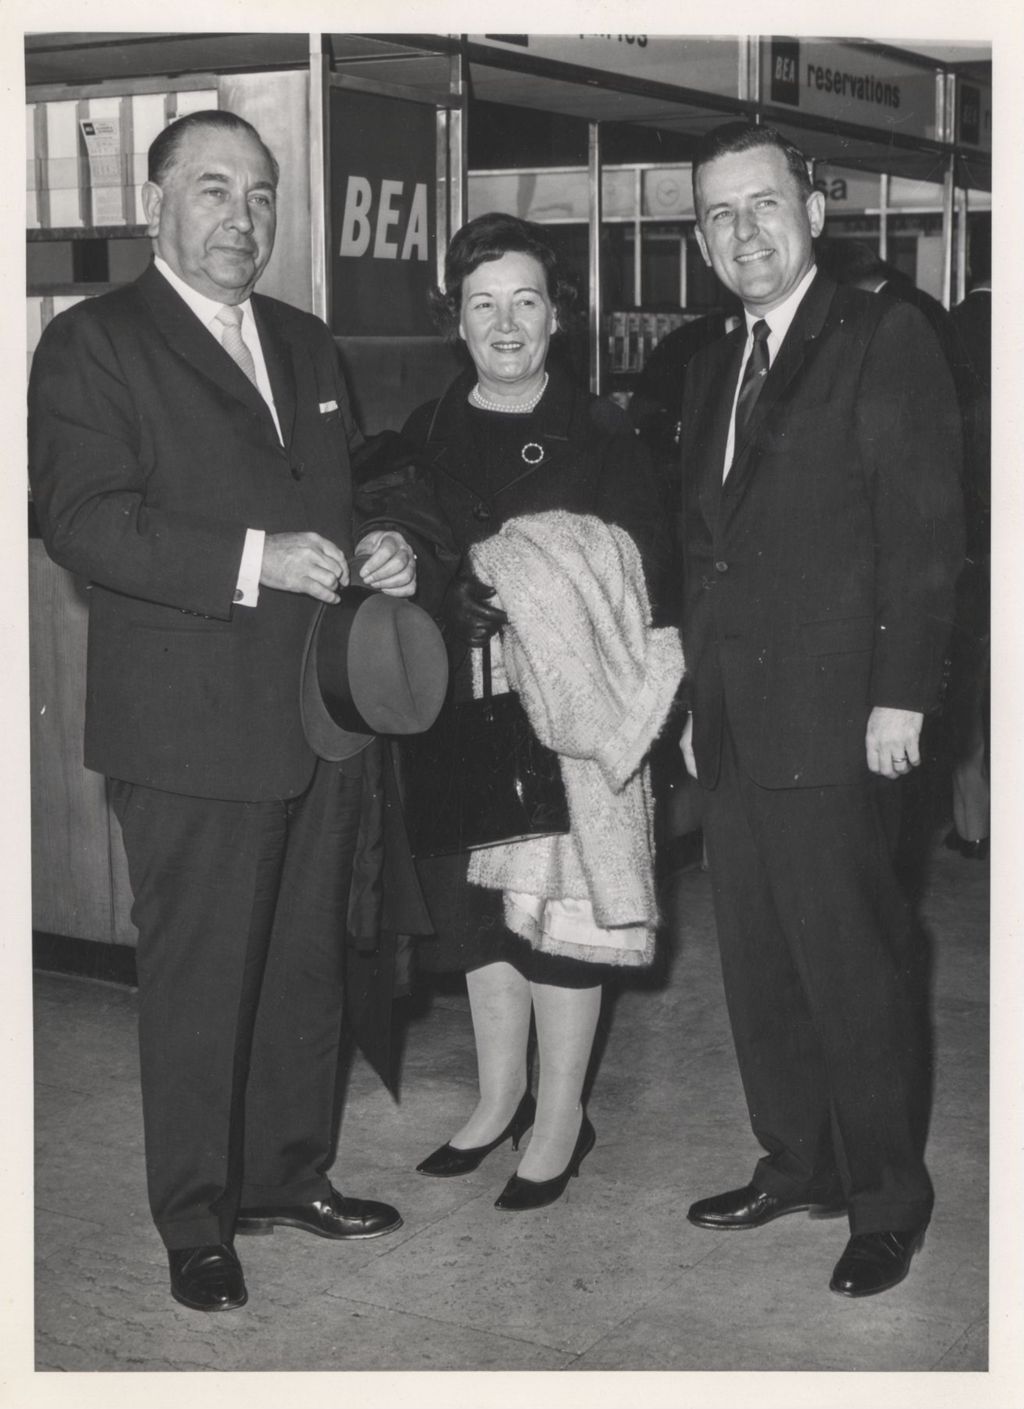 Richard J. Daley and Eleanor Daley at the airport in London